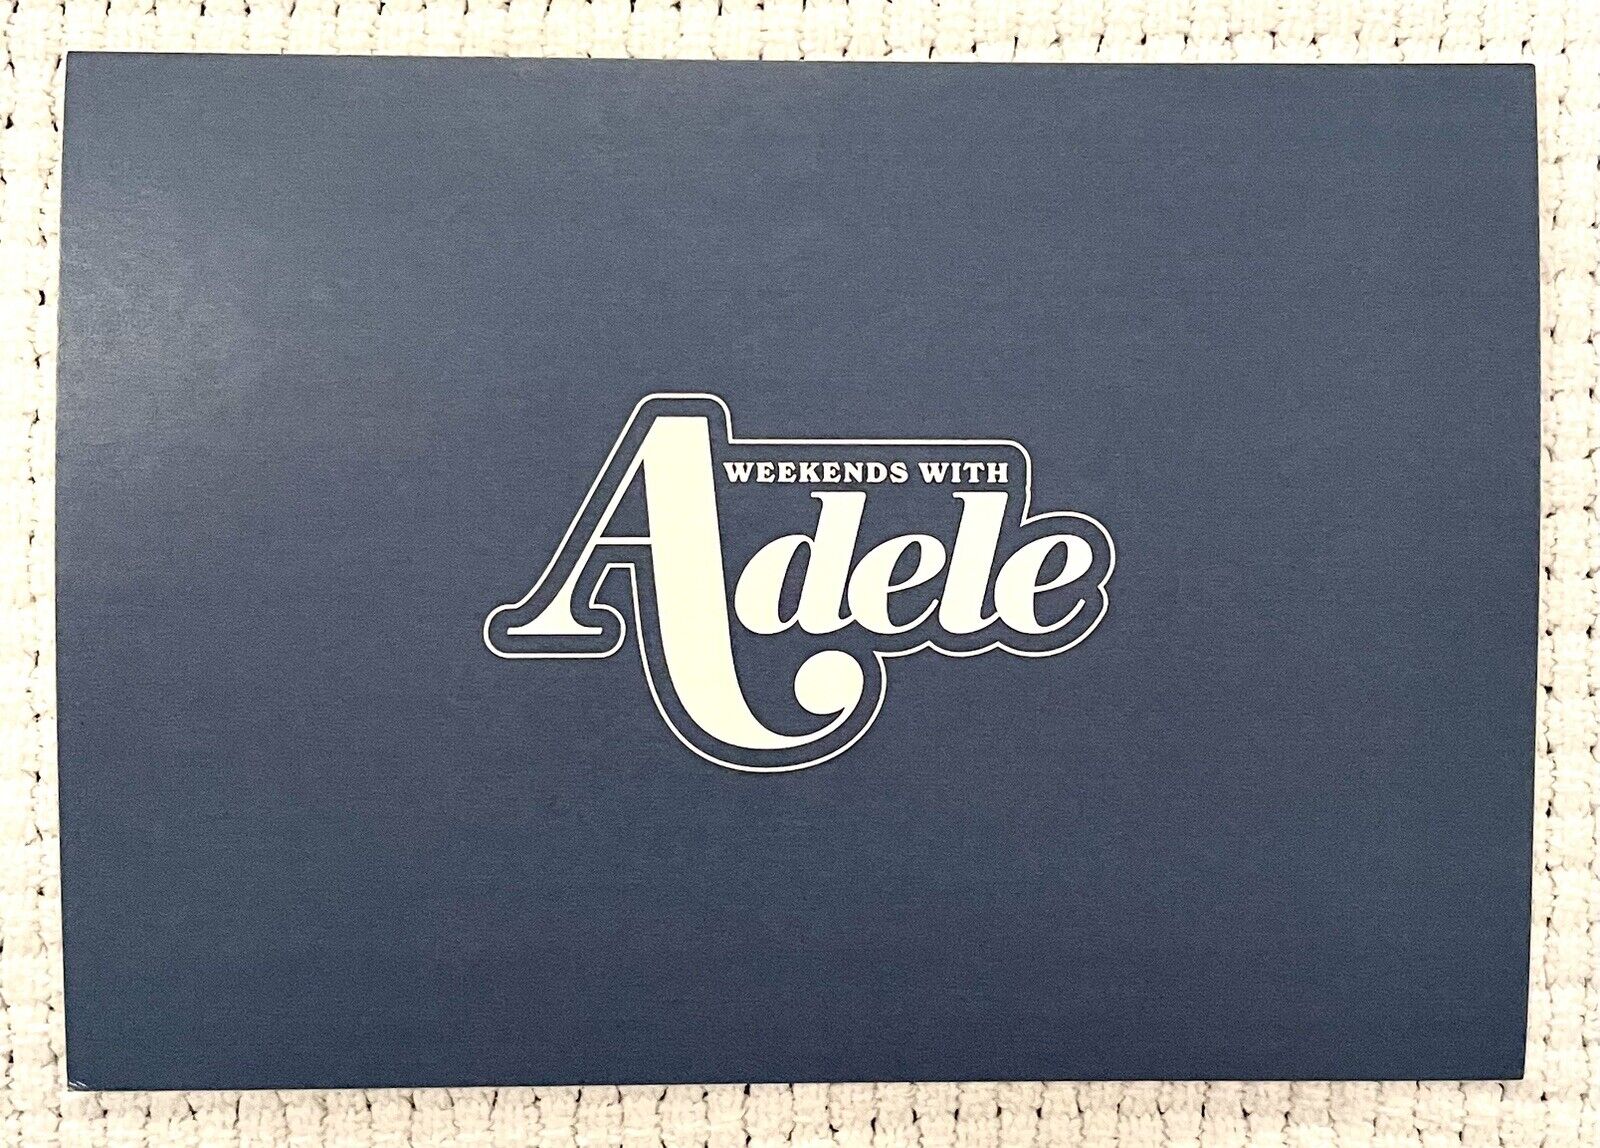 Adele “Weekends With Adele”Handwritten & Signed Note about Filming At Caesars